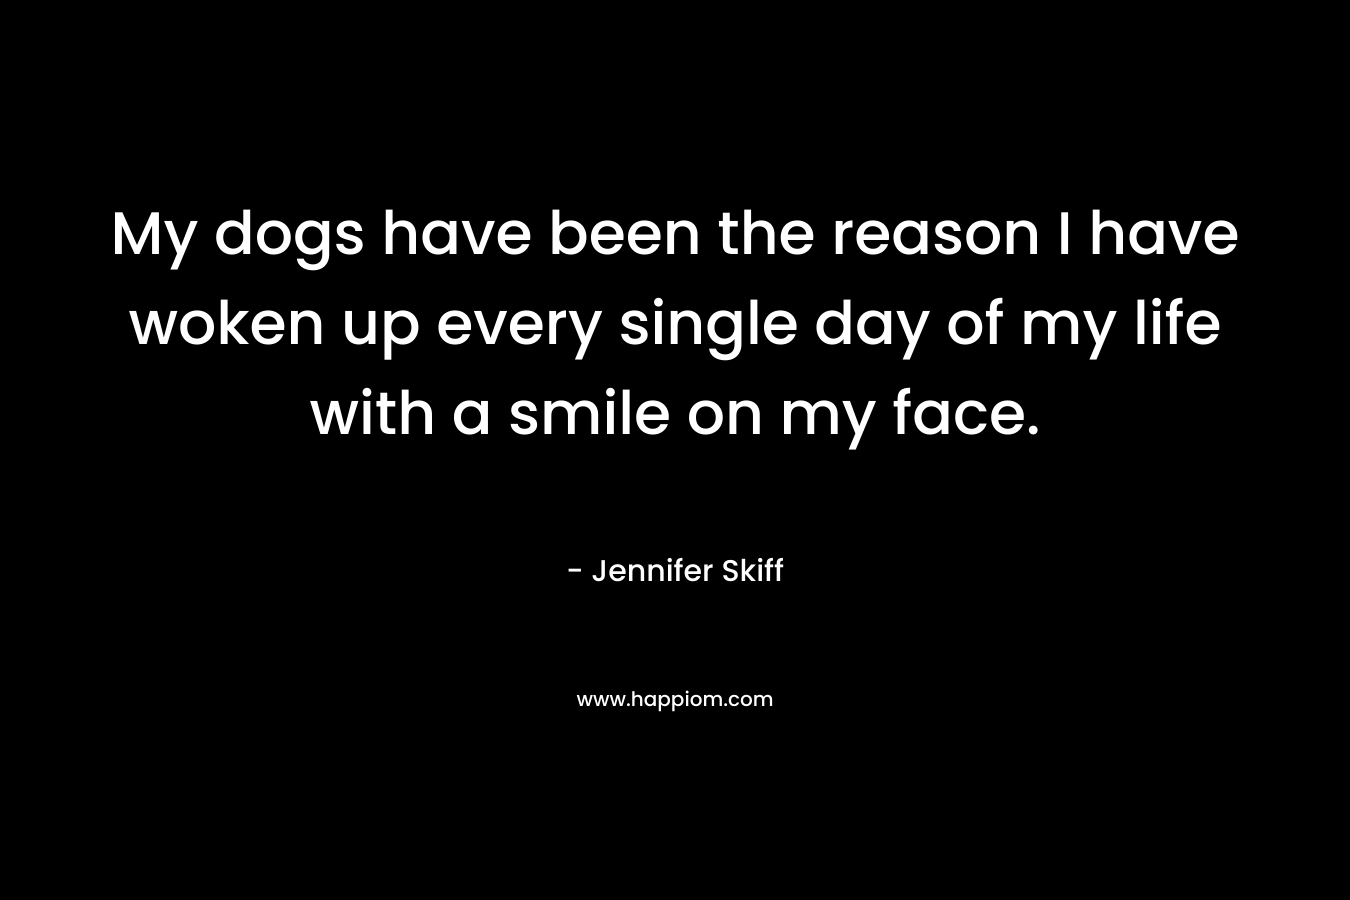 My dogs have been the reason I have woken up every single day of my life with a smile on my face. – Jennifer Skiff